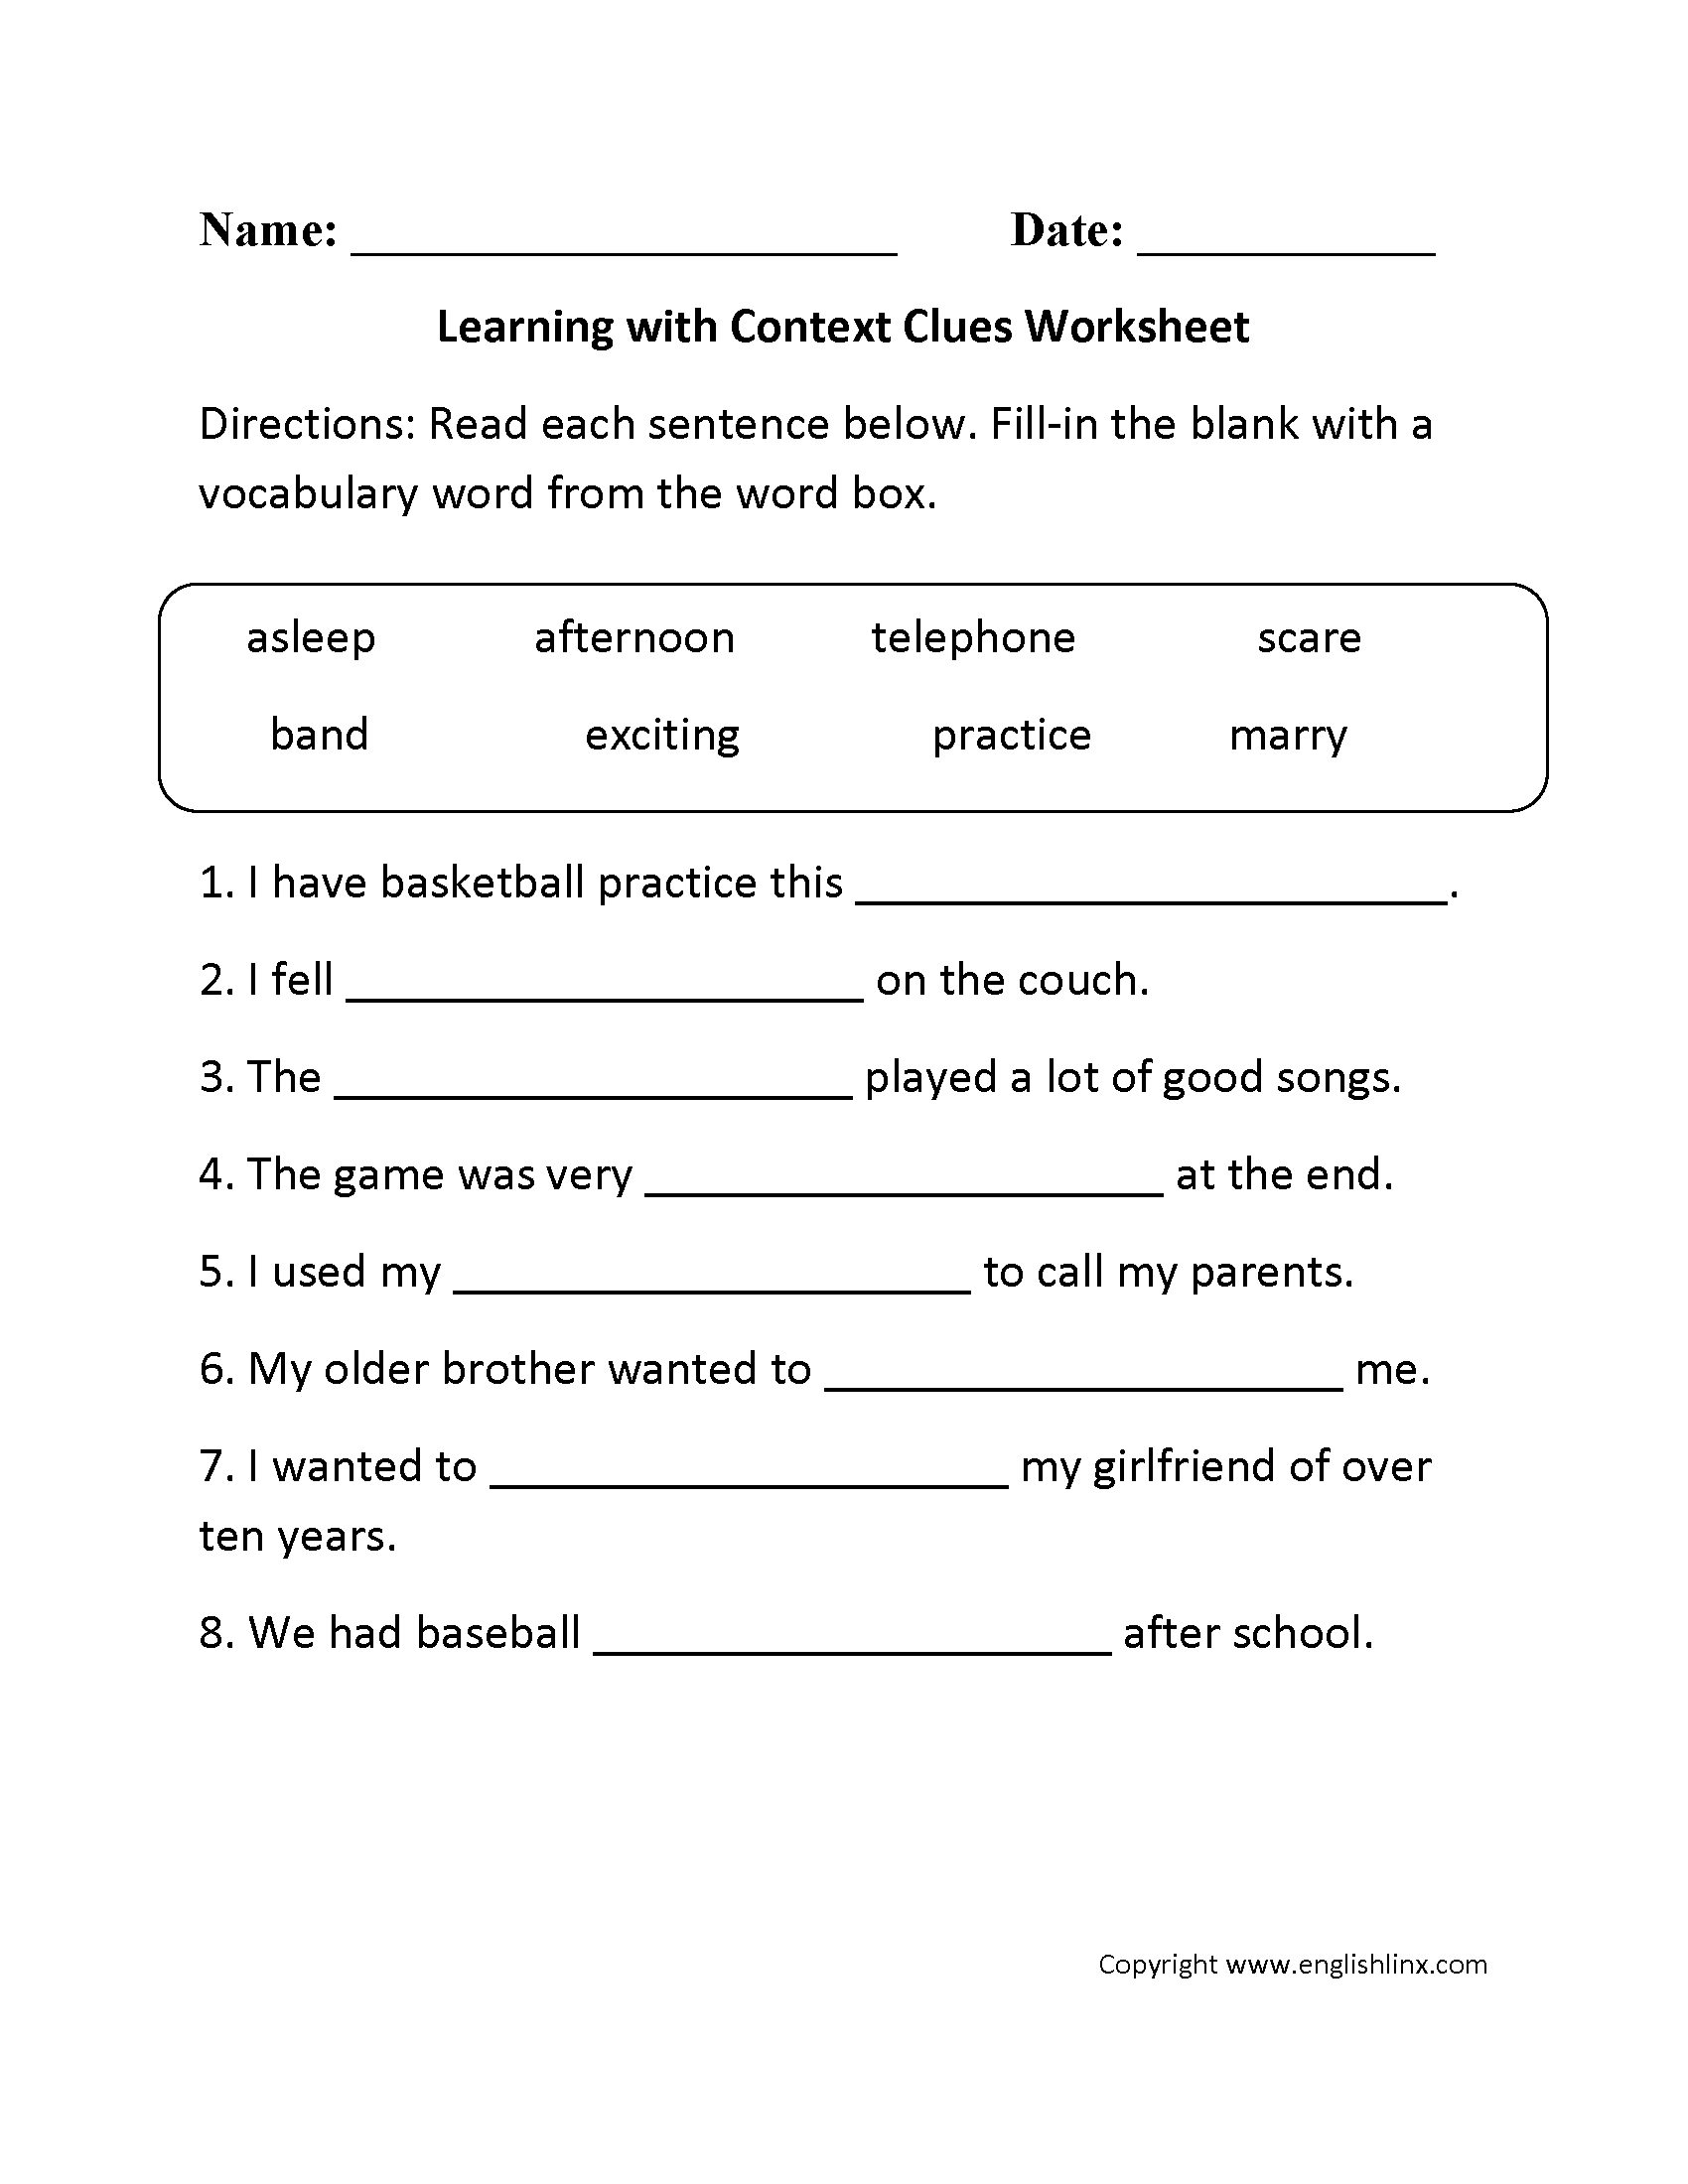 printable-context-clues-worksheets-that-will-make-you-a-better-reader-goodworksheets